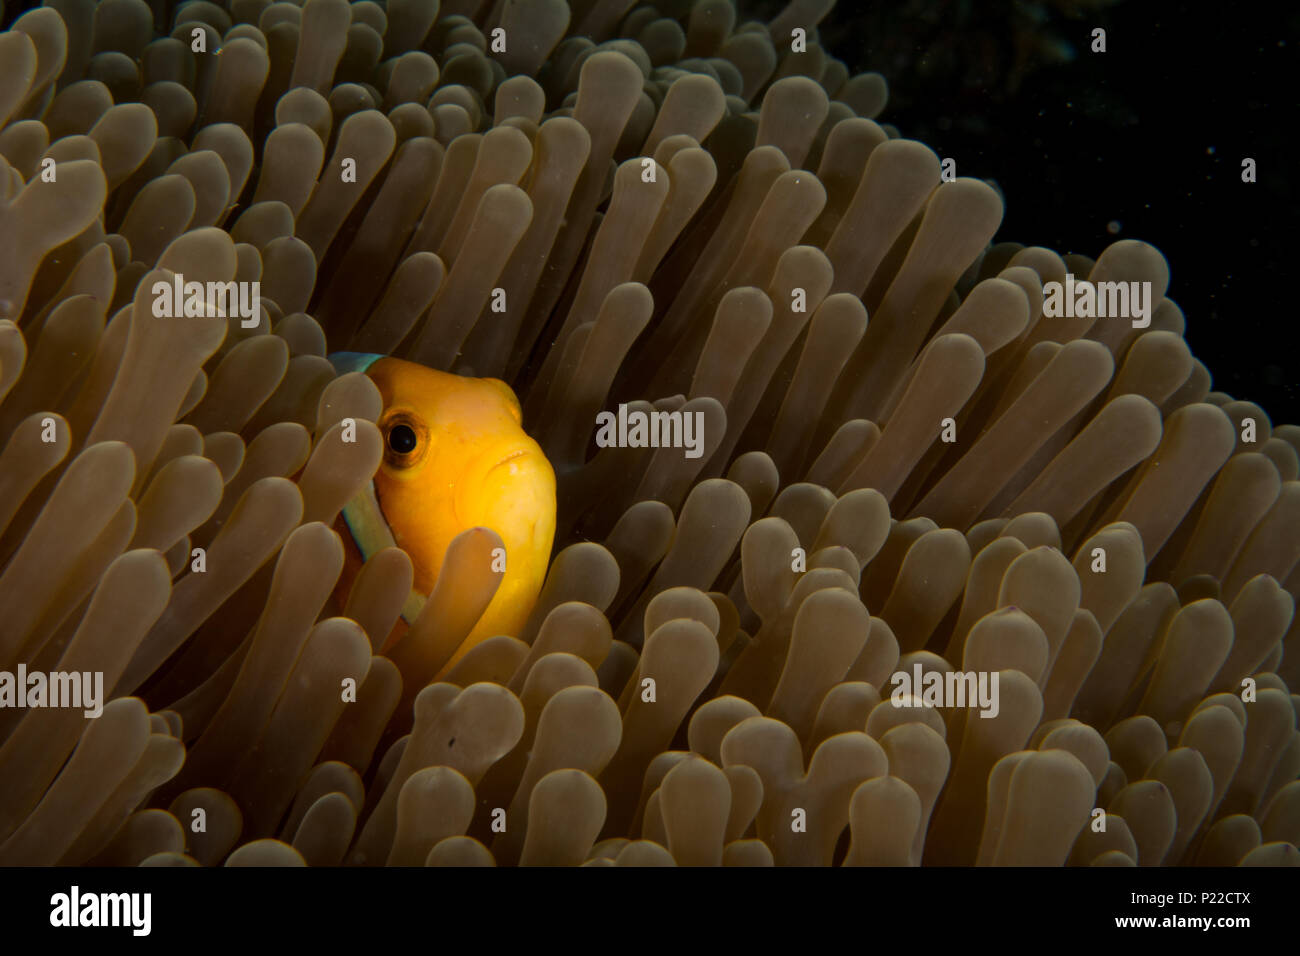 A clownfish anemone fish pokes its head out between the tentacles on the protective anemone that it lives in Stock Photo